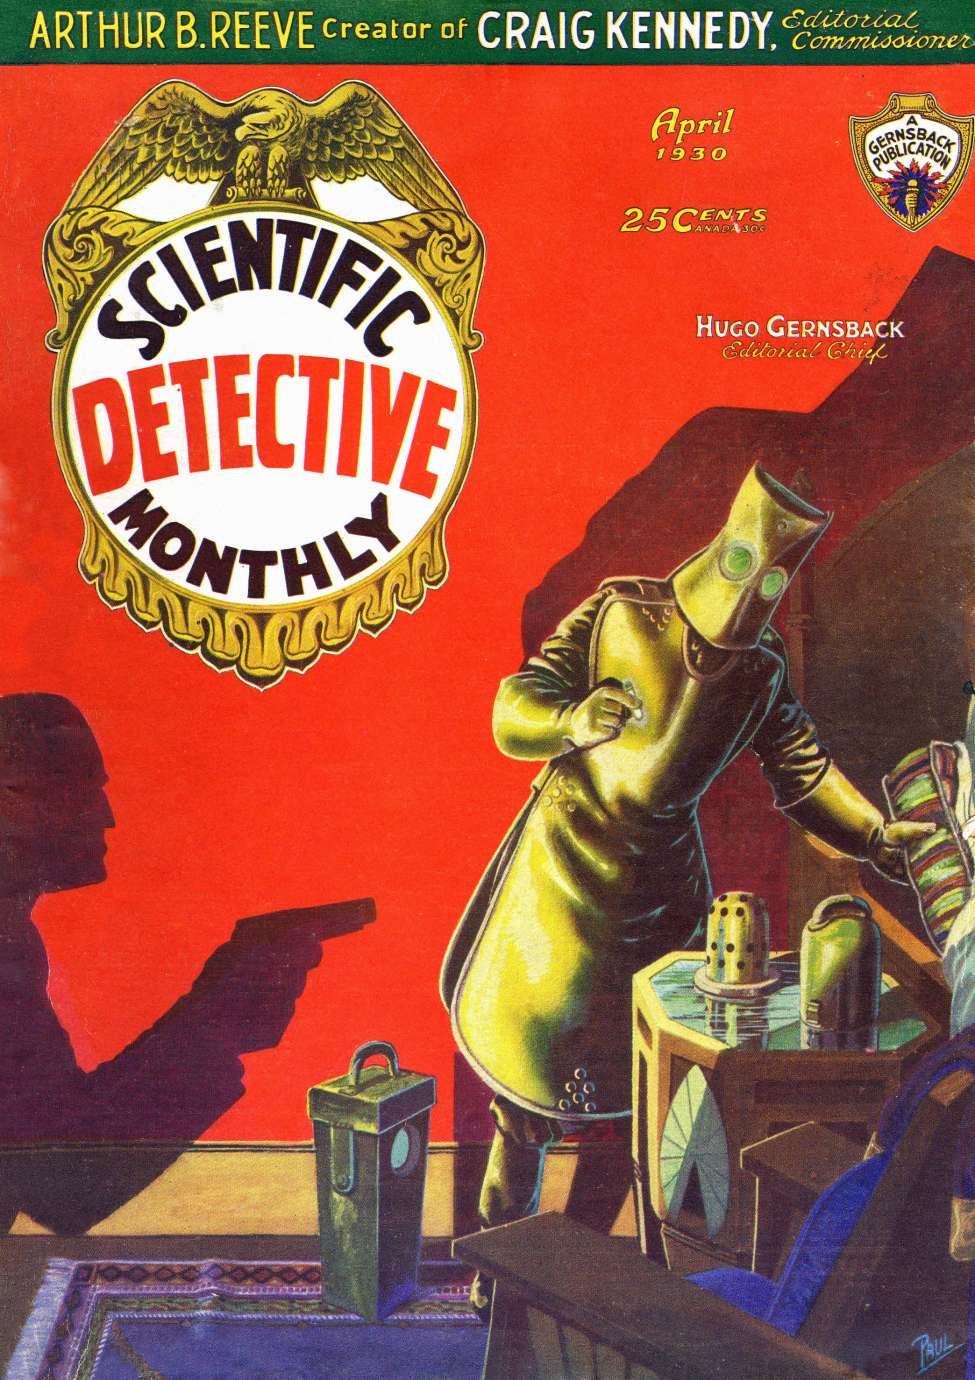 Comic Book Cover For Scientific Detective Monthly v1 4 - Black Light - Henry Leverage